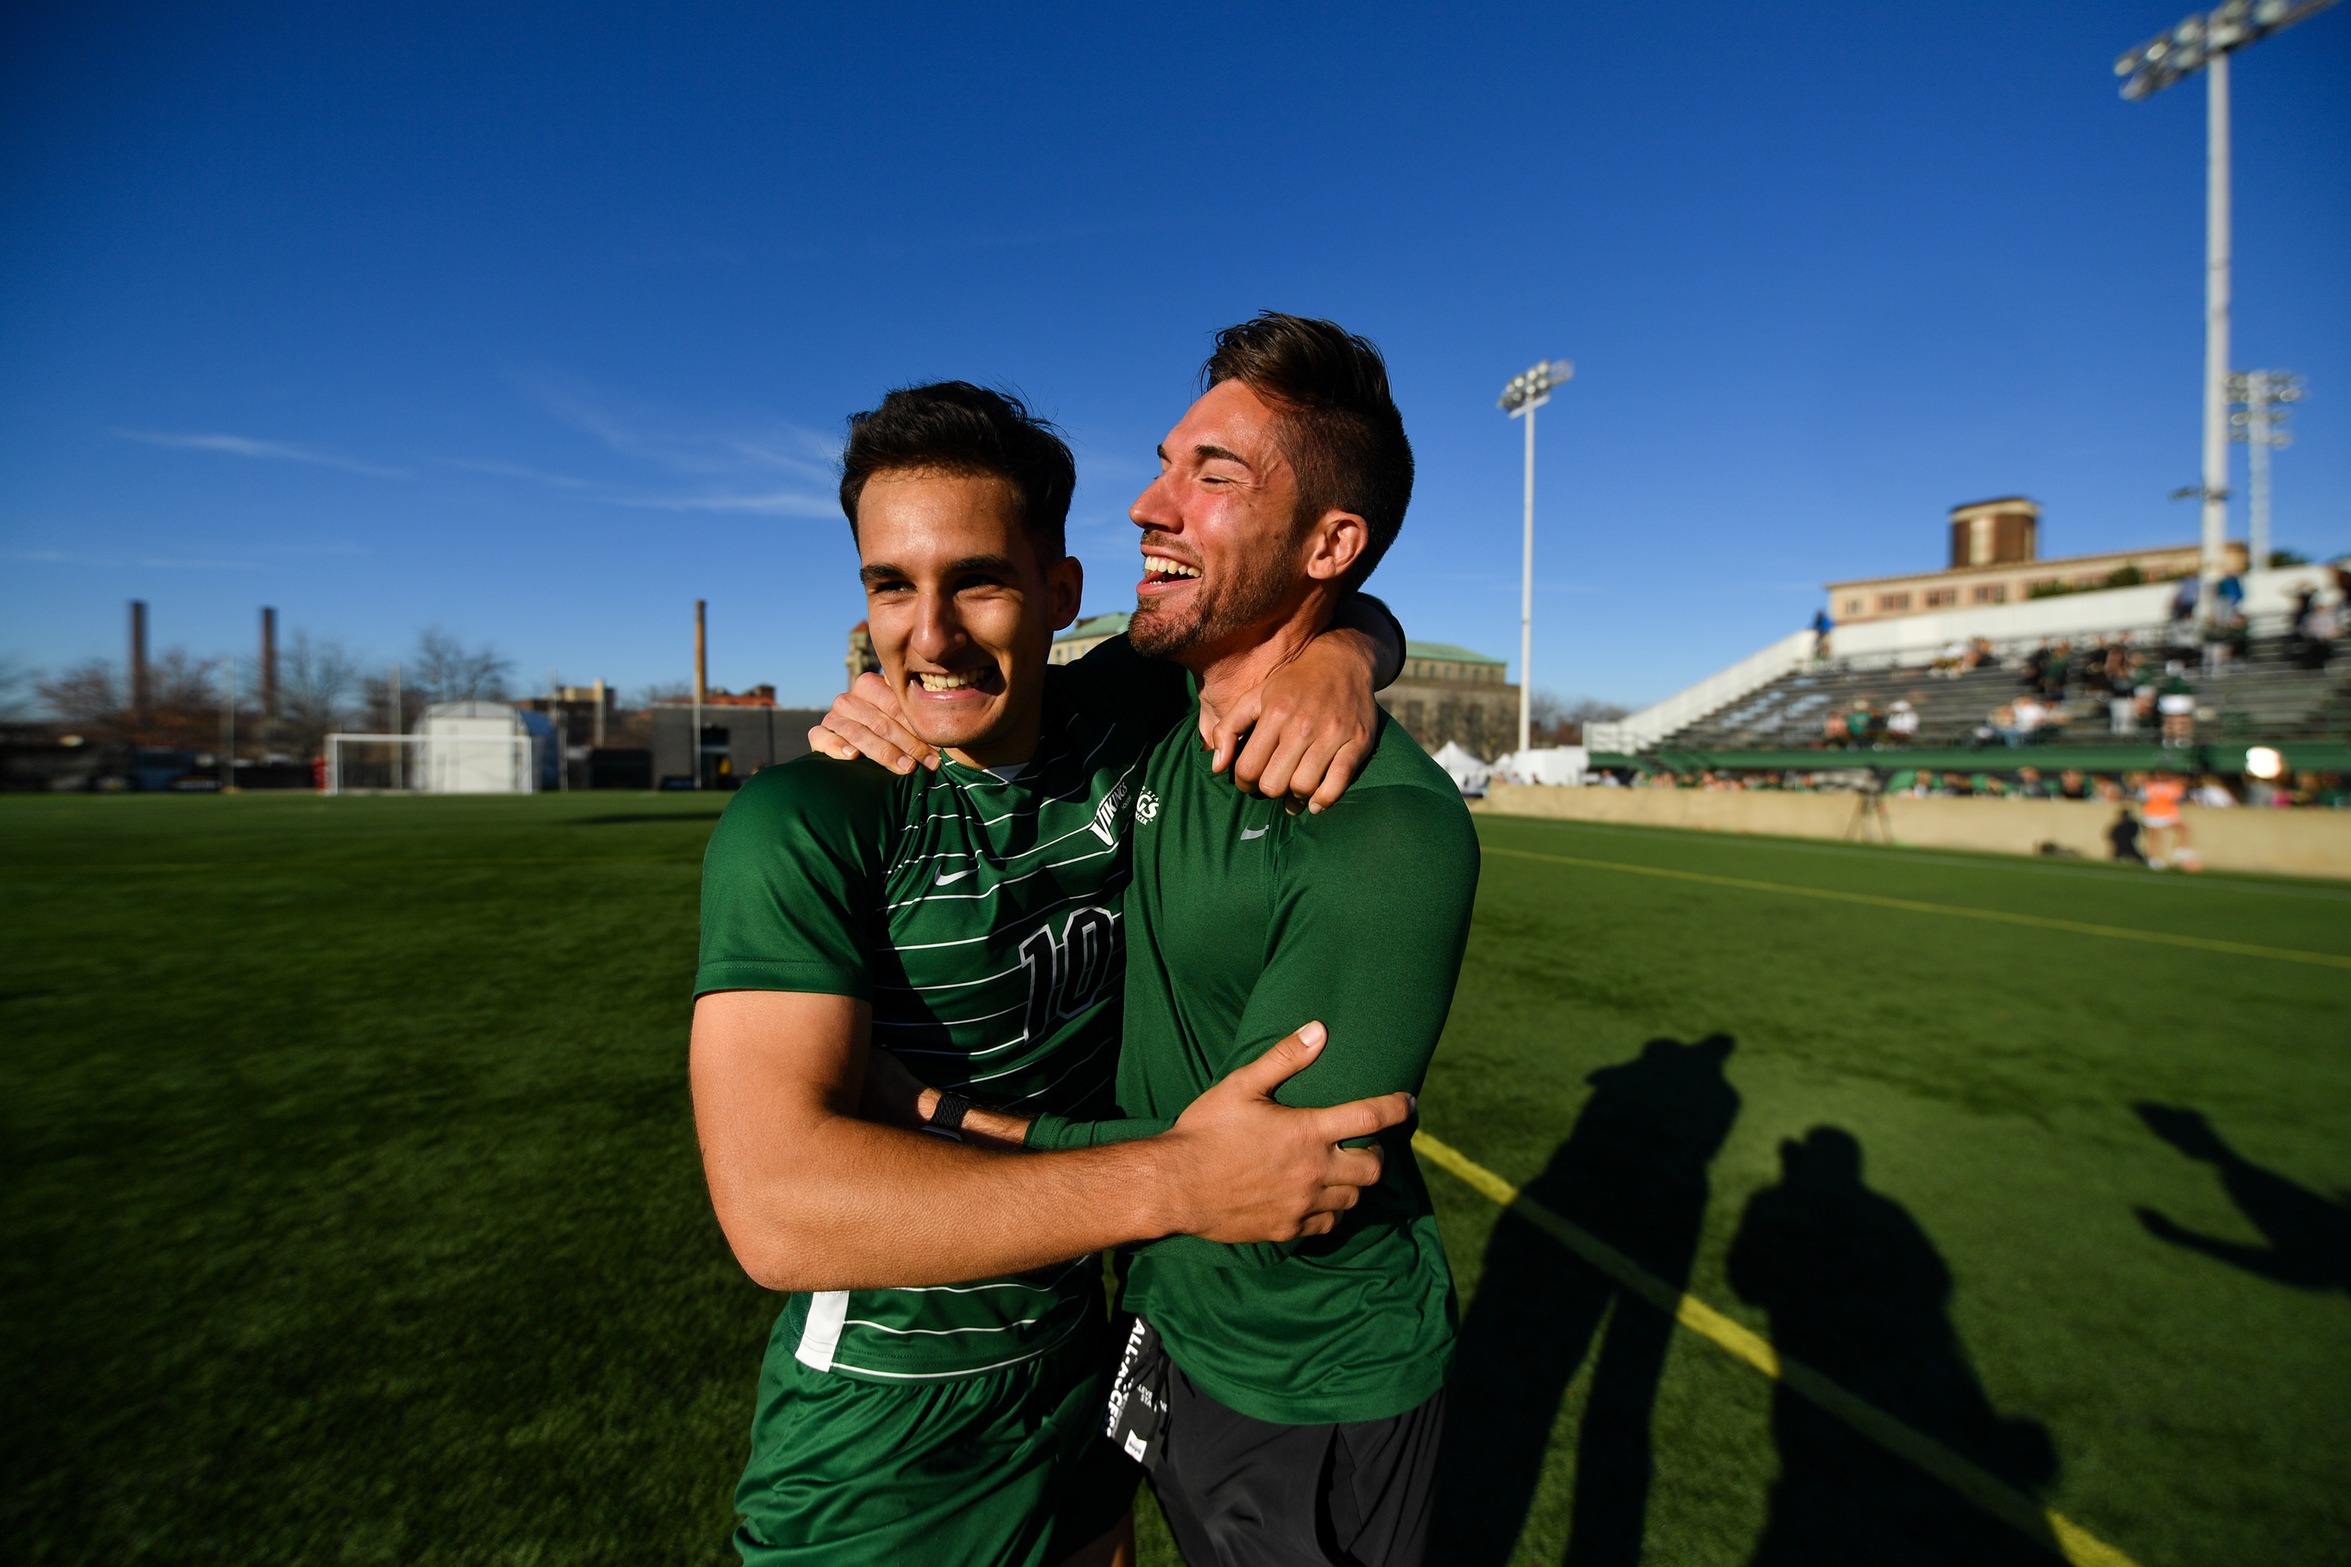 Cleveland State Men's Soccer Advances to #HLMSOC Championship With 4-2 Win Over Oakland